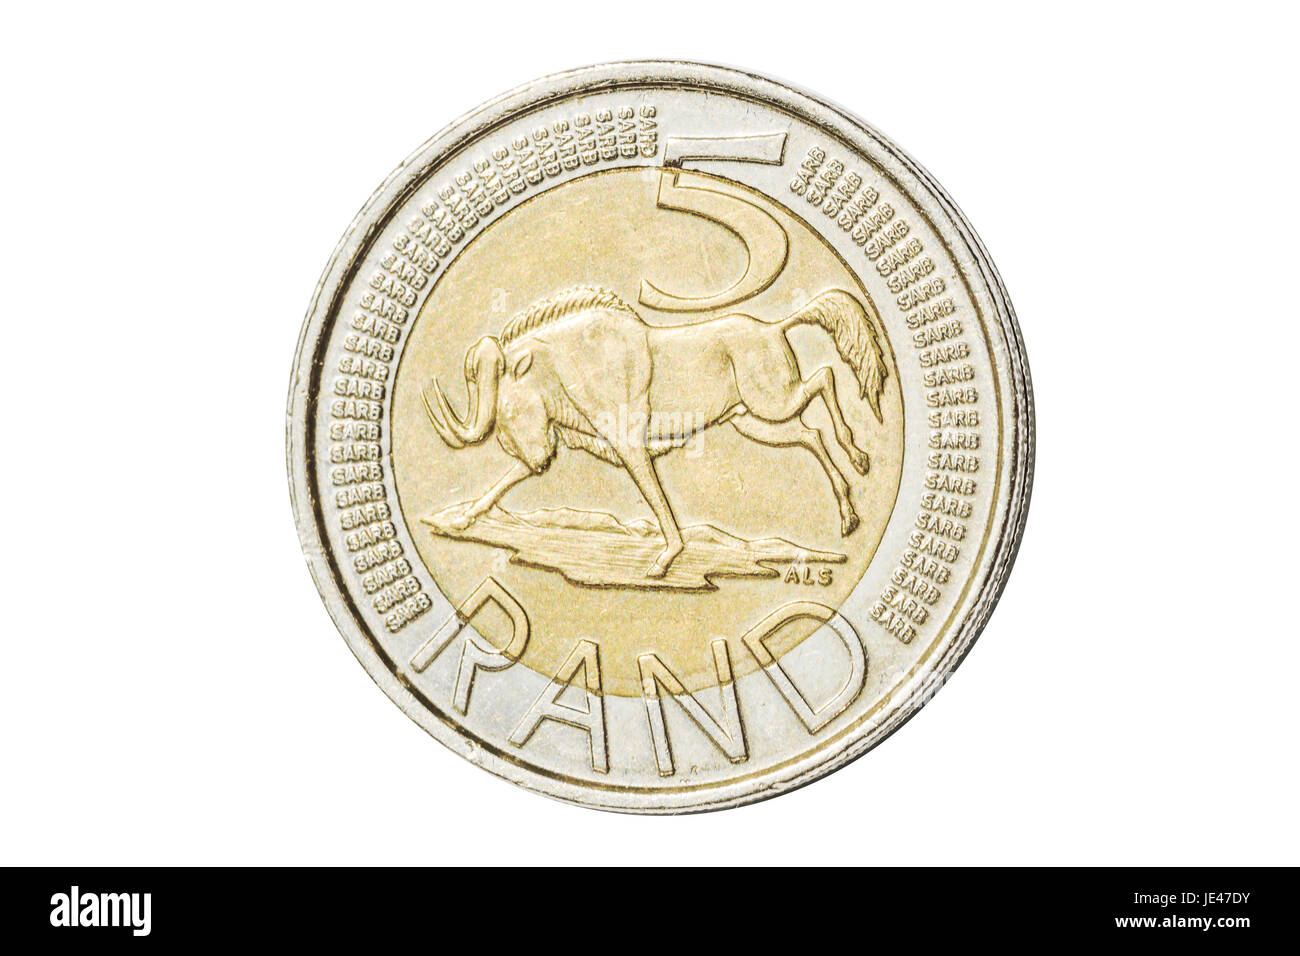 South African 5 rand coin Stock Photo